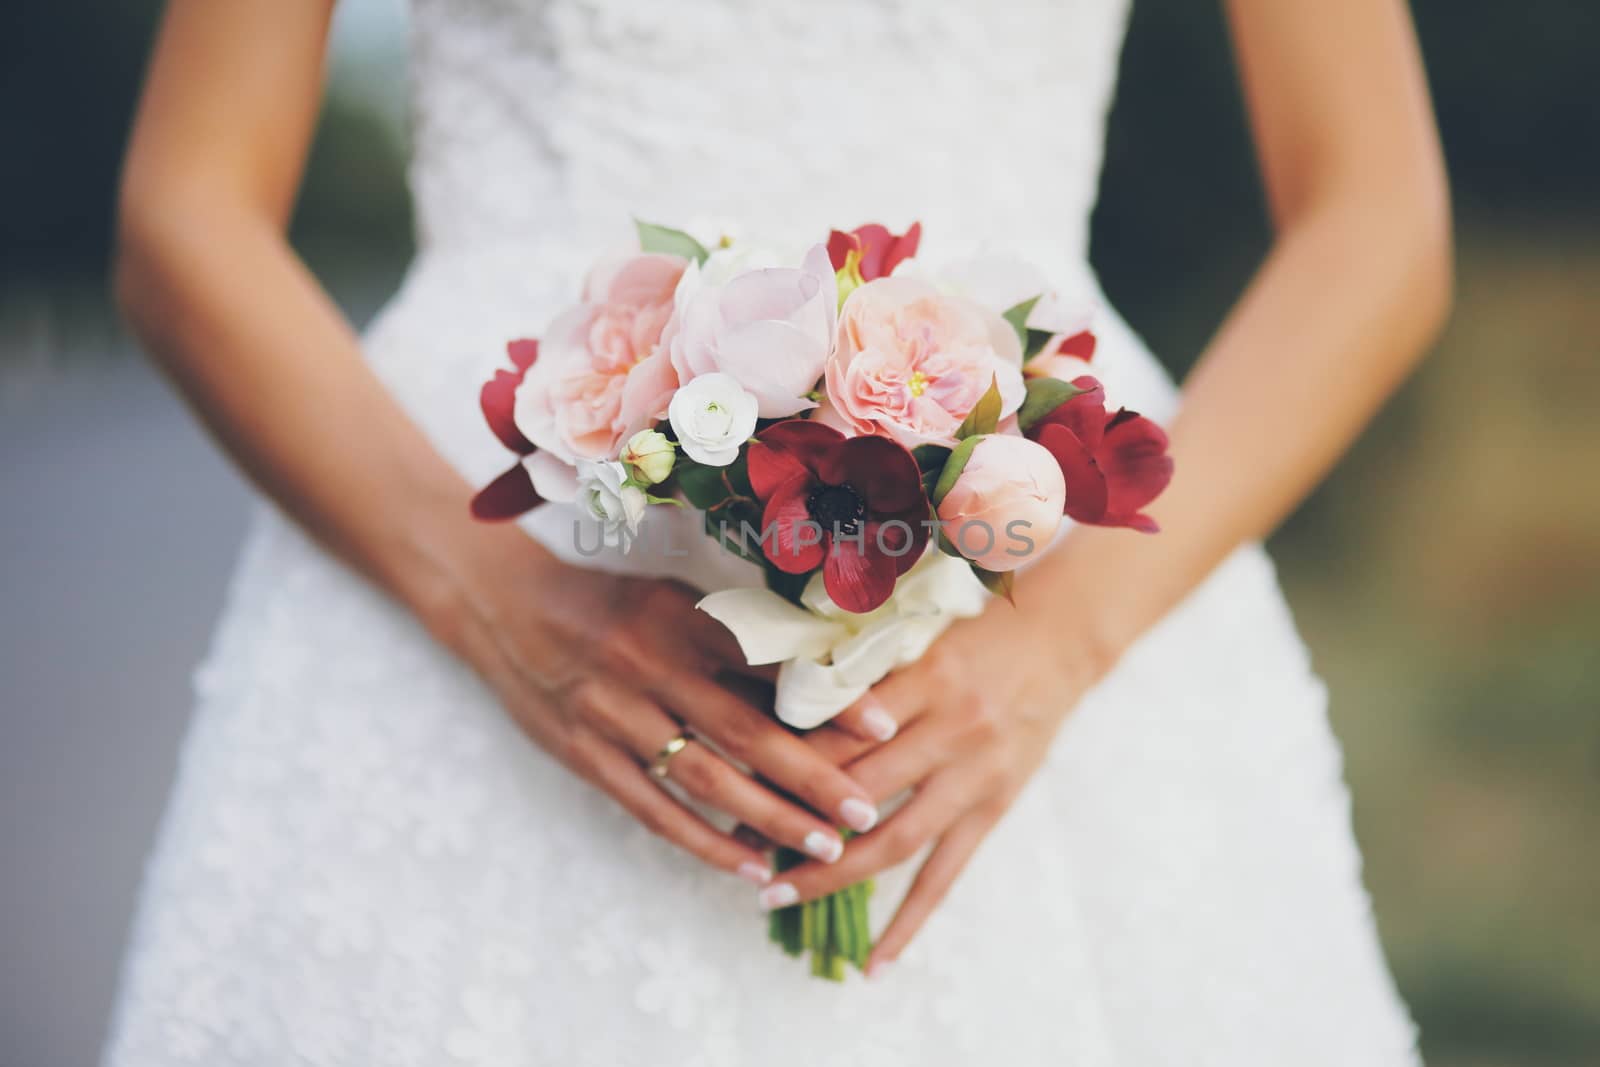 The bride holds a wedding bouquet. Women's hands with flowers. Wedding. A beautiful couple. High quality photo